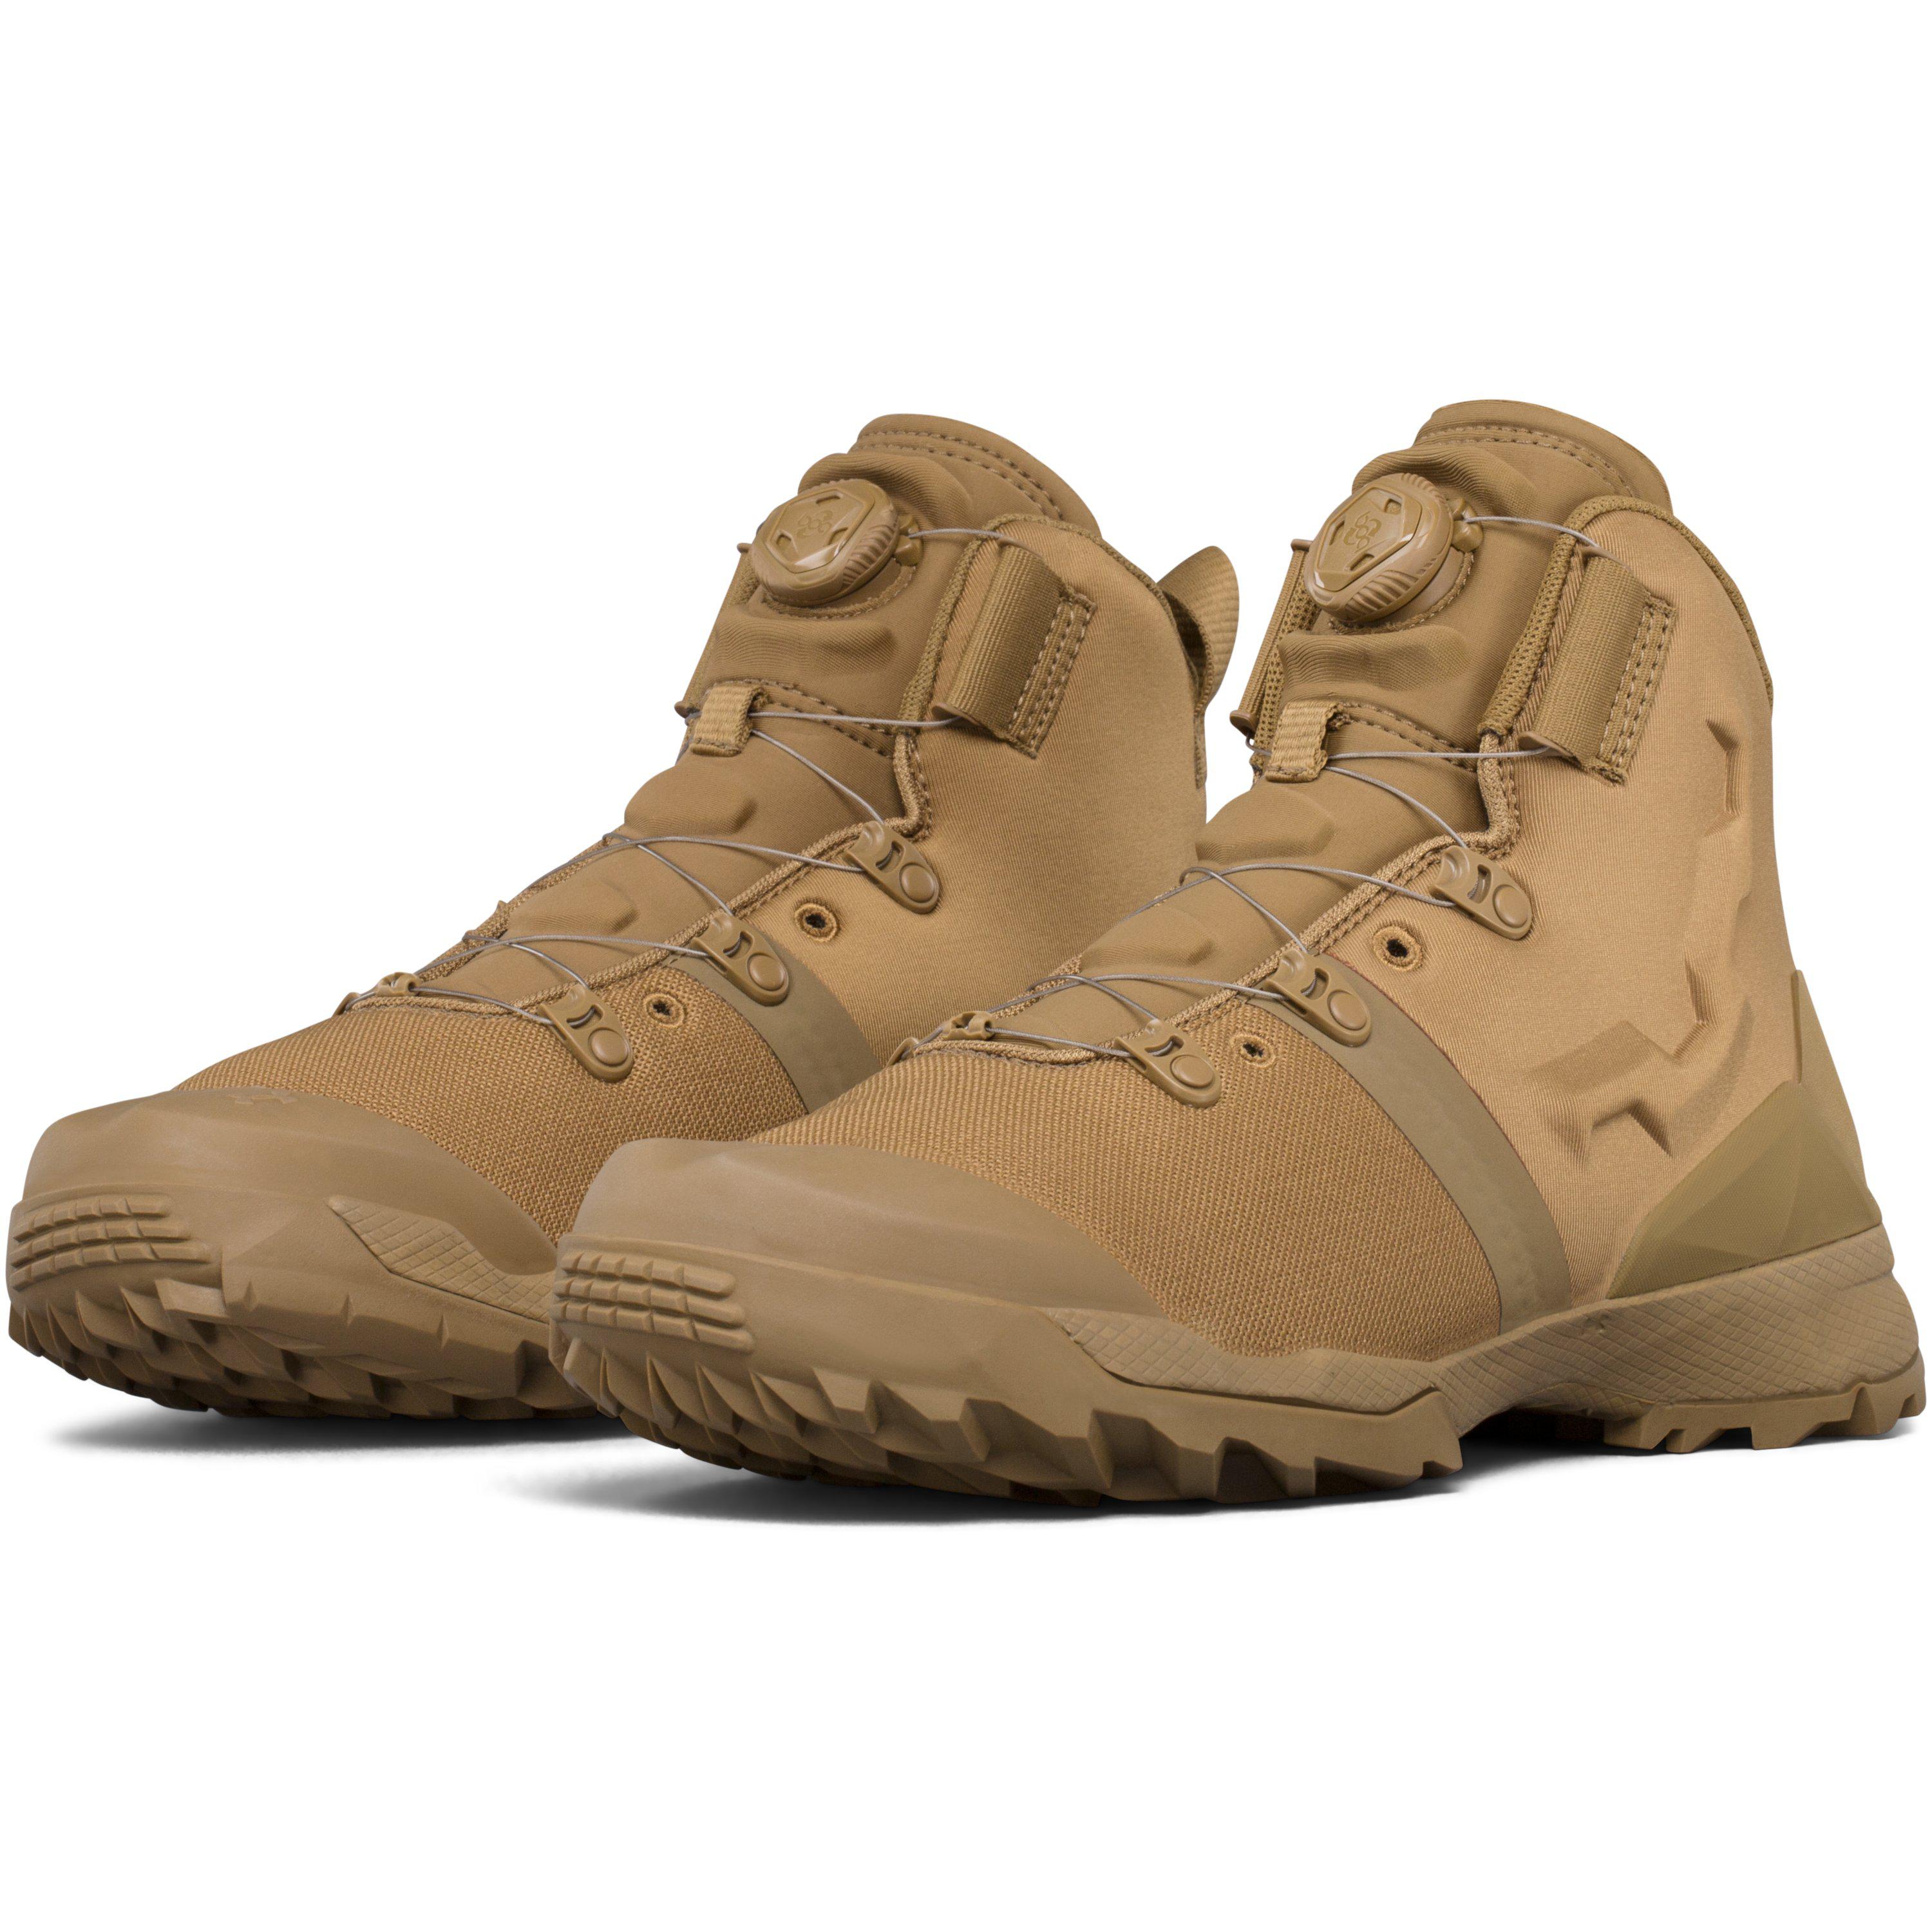 ua infil tactical boots Cheaper Than Retail Price> Buy Clothing,  Accessories and lifestyle products for women & men -